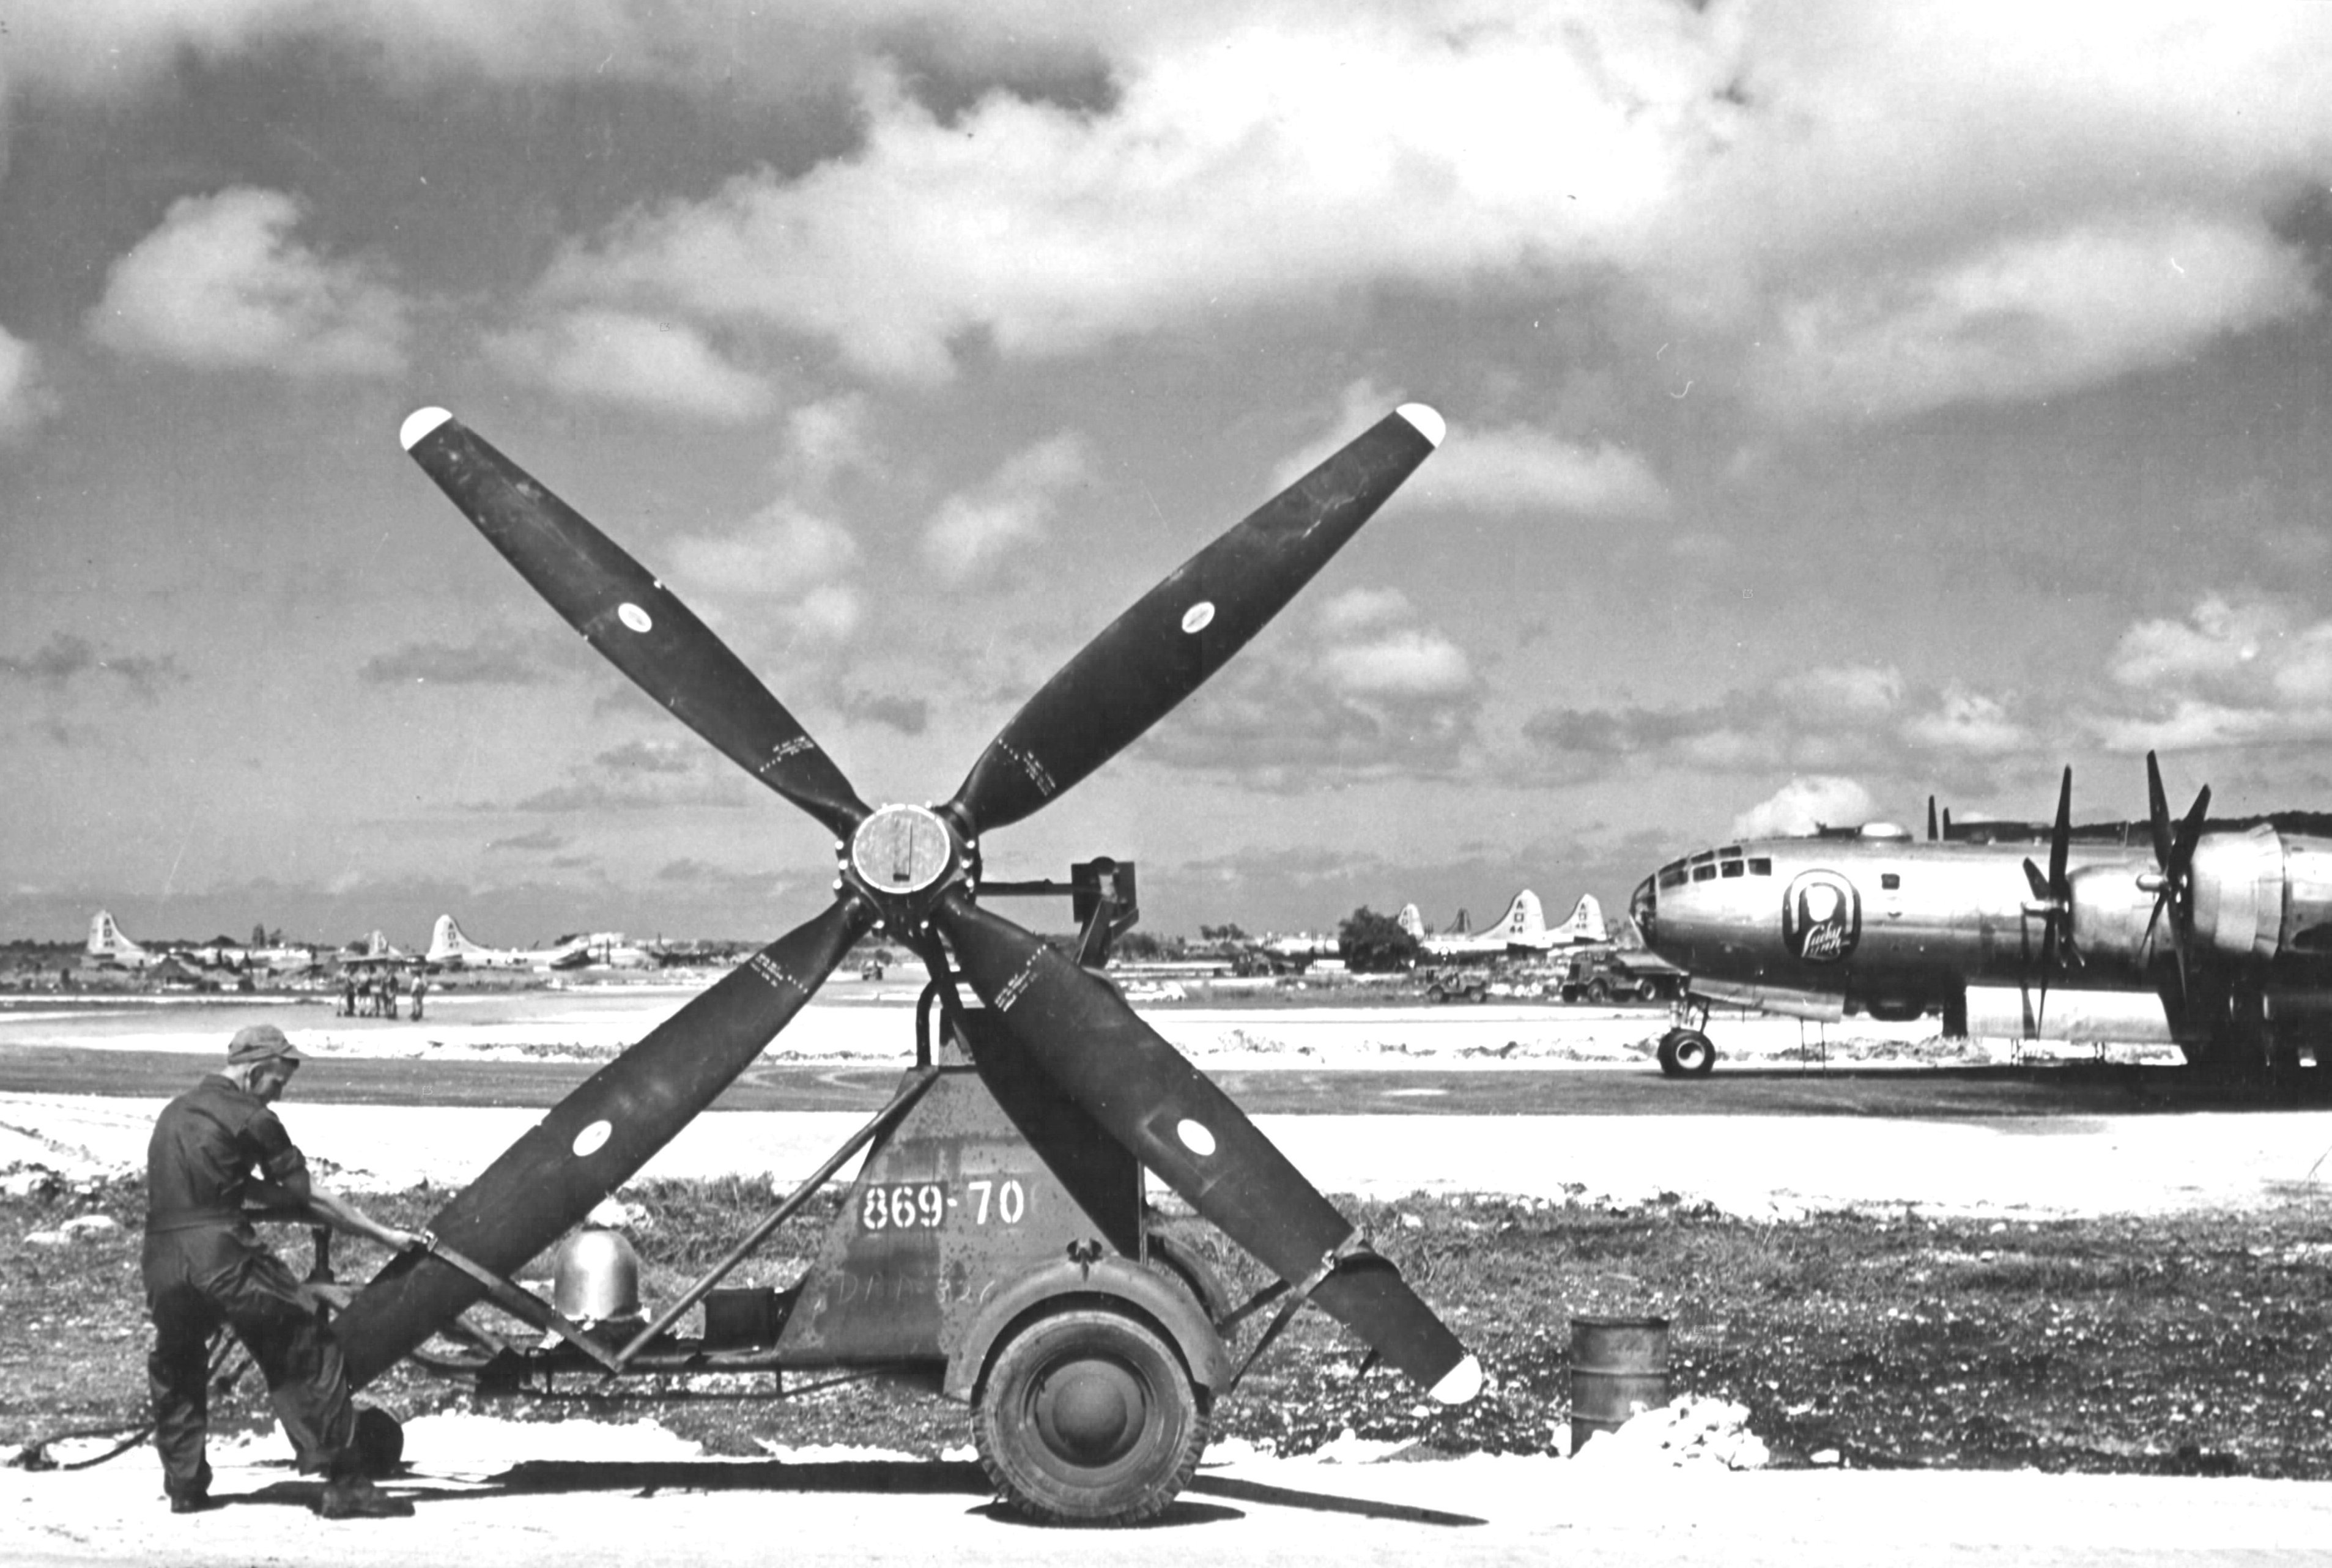 An aircraft maintenance crewman with the 497th Bomb Group at Isley Field on Saipan, Mariana Islands securing a propeller for a B-29 Superfortress to a service trailer, late 1944. Note B-29 “Lucky Lynn” beyond.